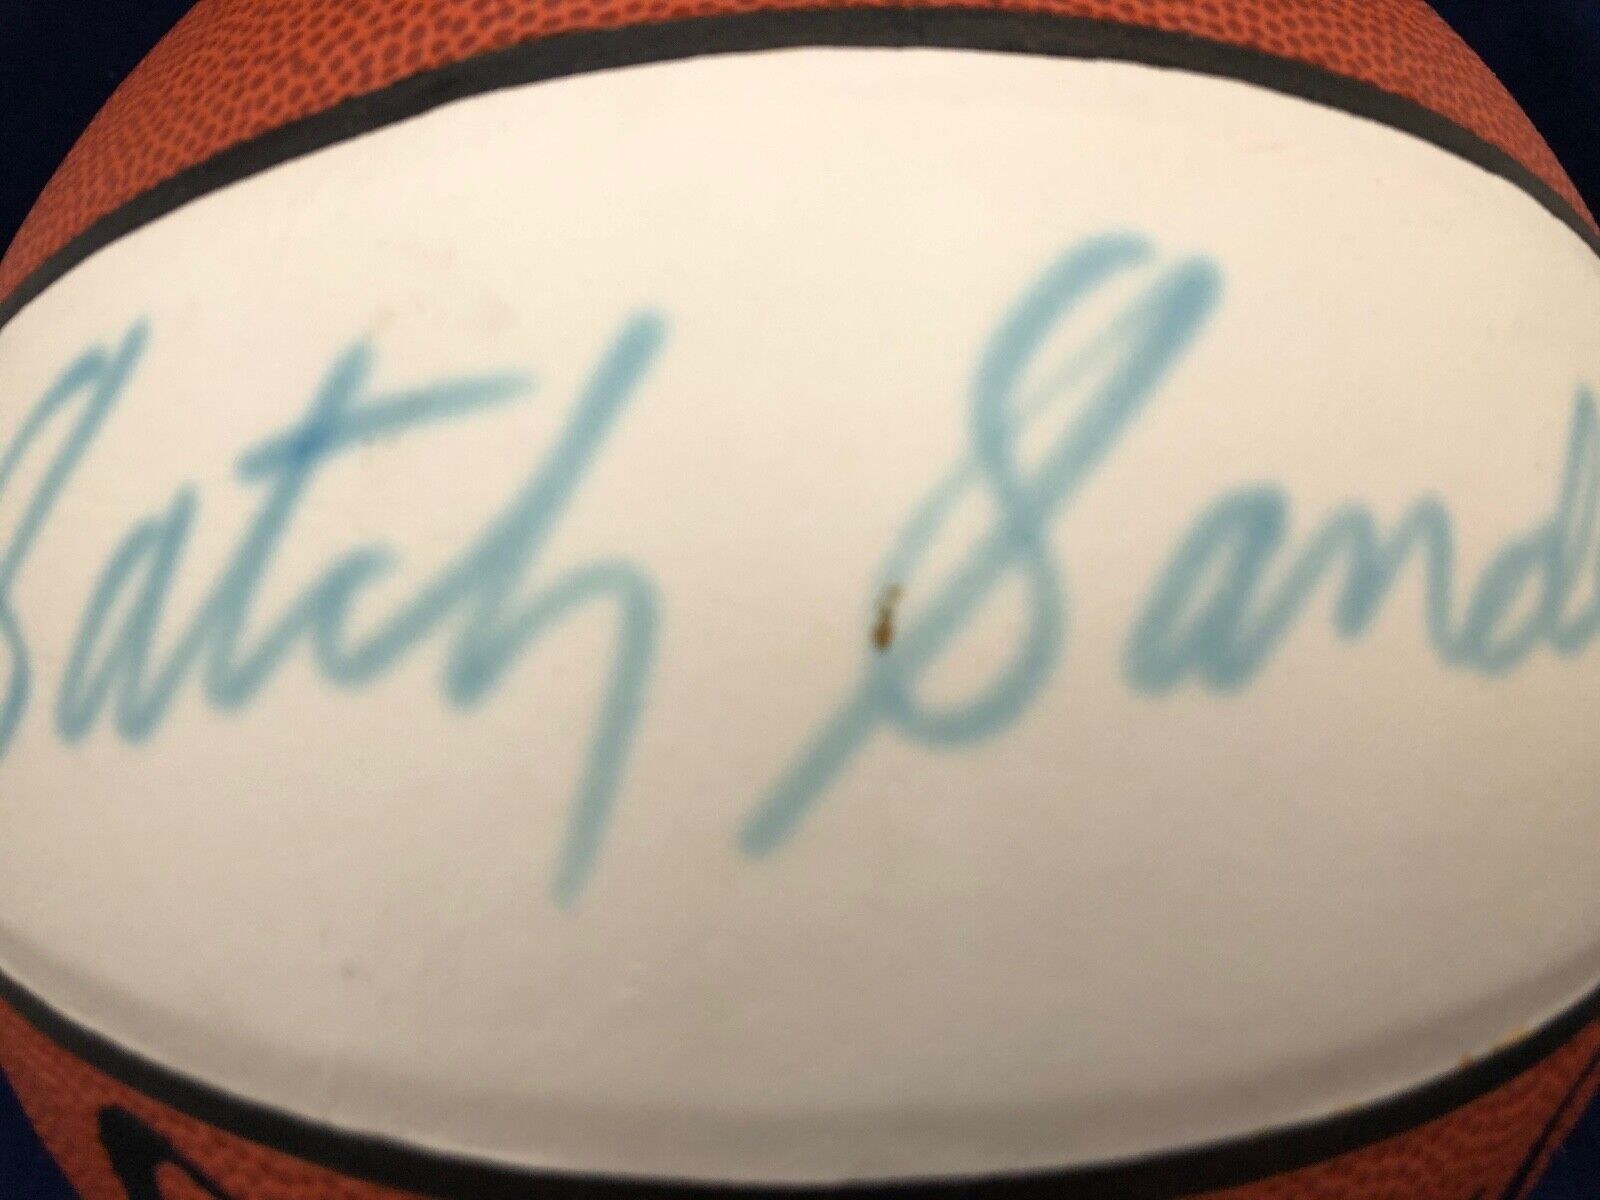 Satch Sanders autographed White Panel basketball Spalding